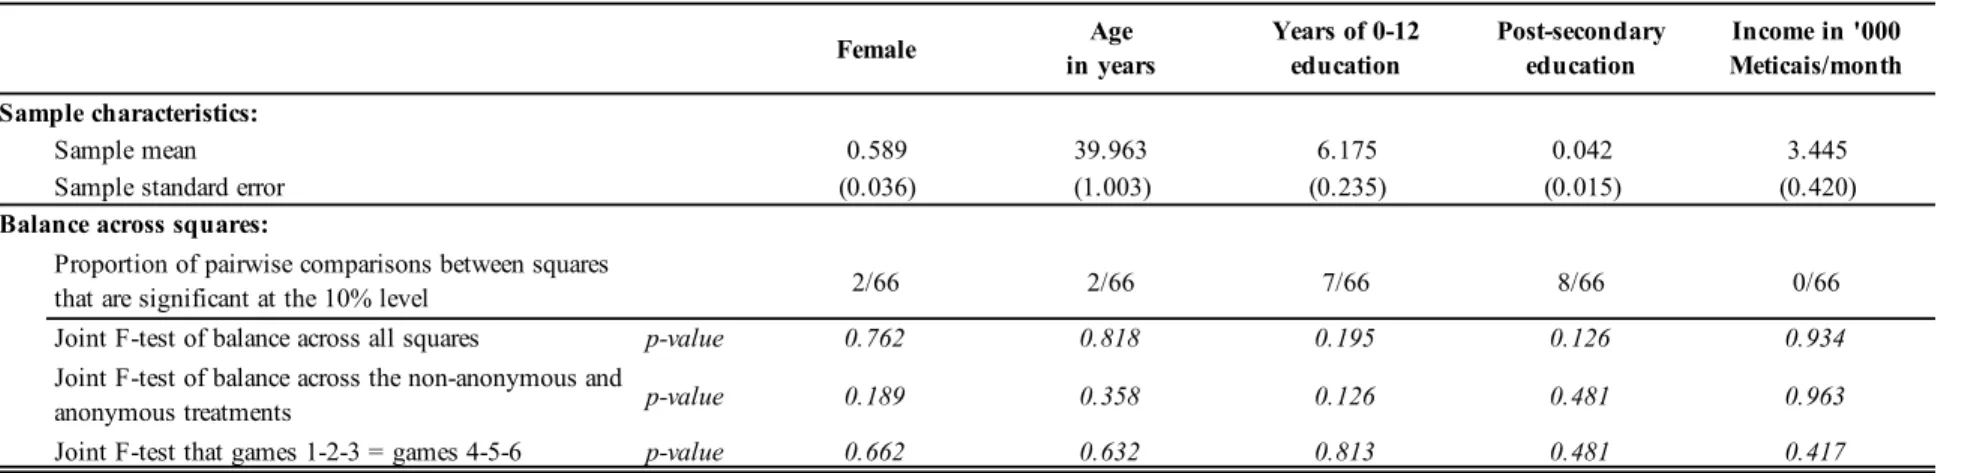 Table 1: Sample characteristics and balance Female Age                             in years Years of 0-12 education Post-secondary education Income in '000 Meticais/month Sample characteristics: Sample mean  0.589 39.963 6.175 0.042 3.445